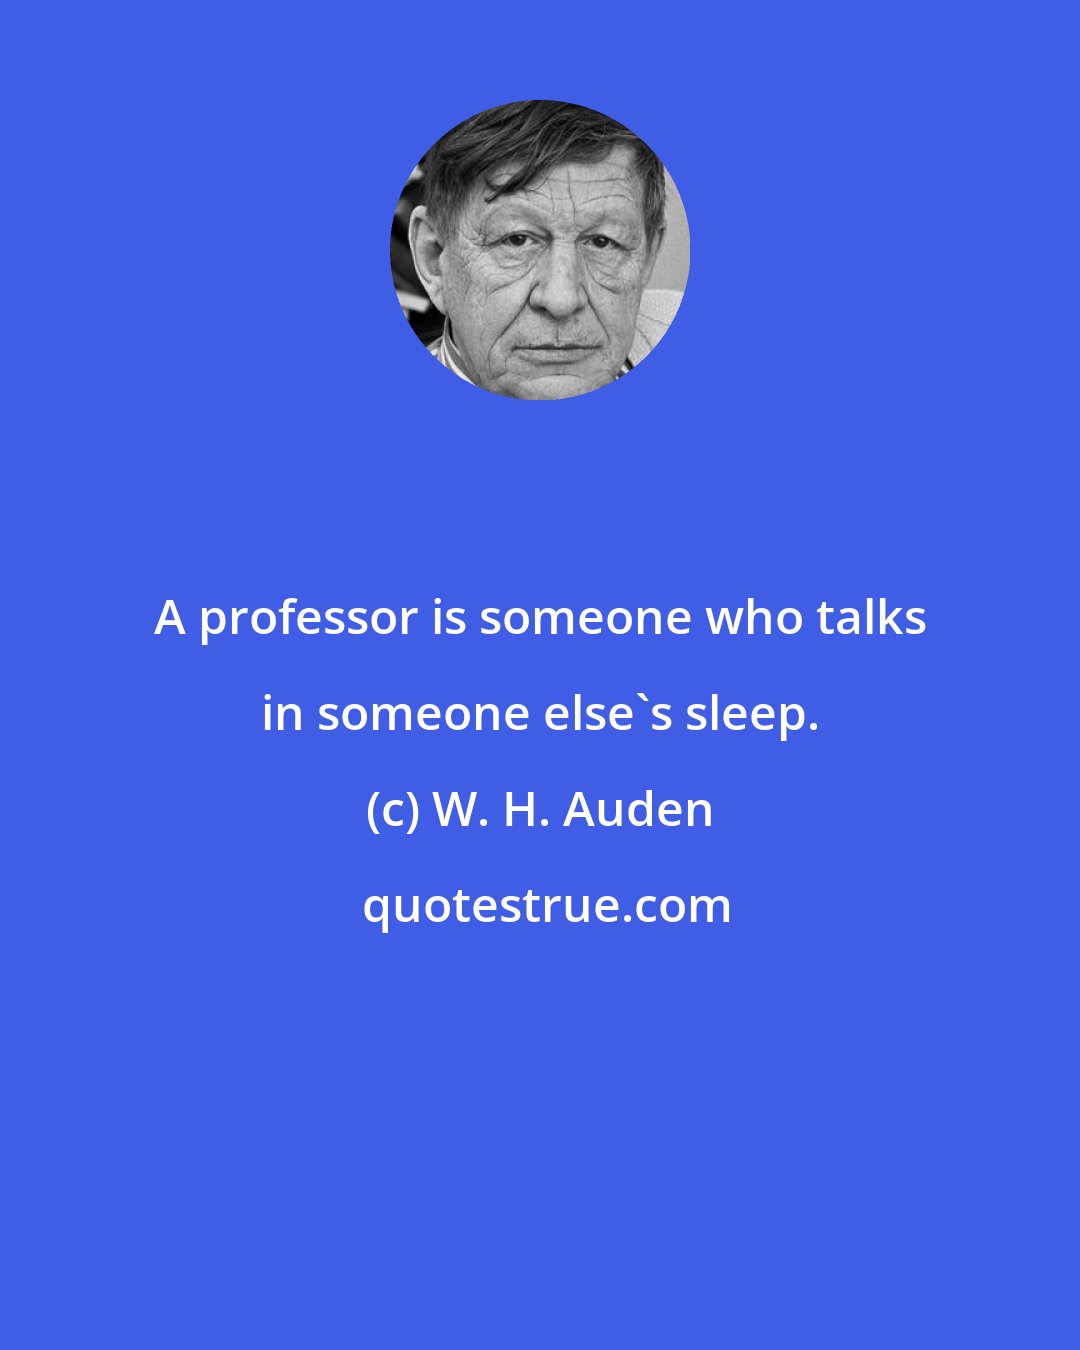 W. H. Auden: A professor is someone who talks in someone else's sleep.